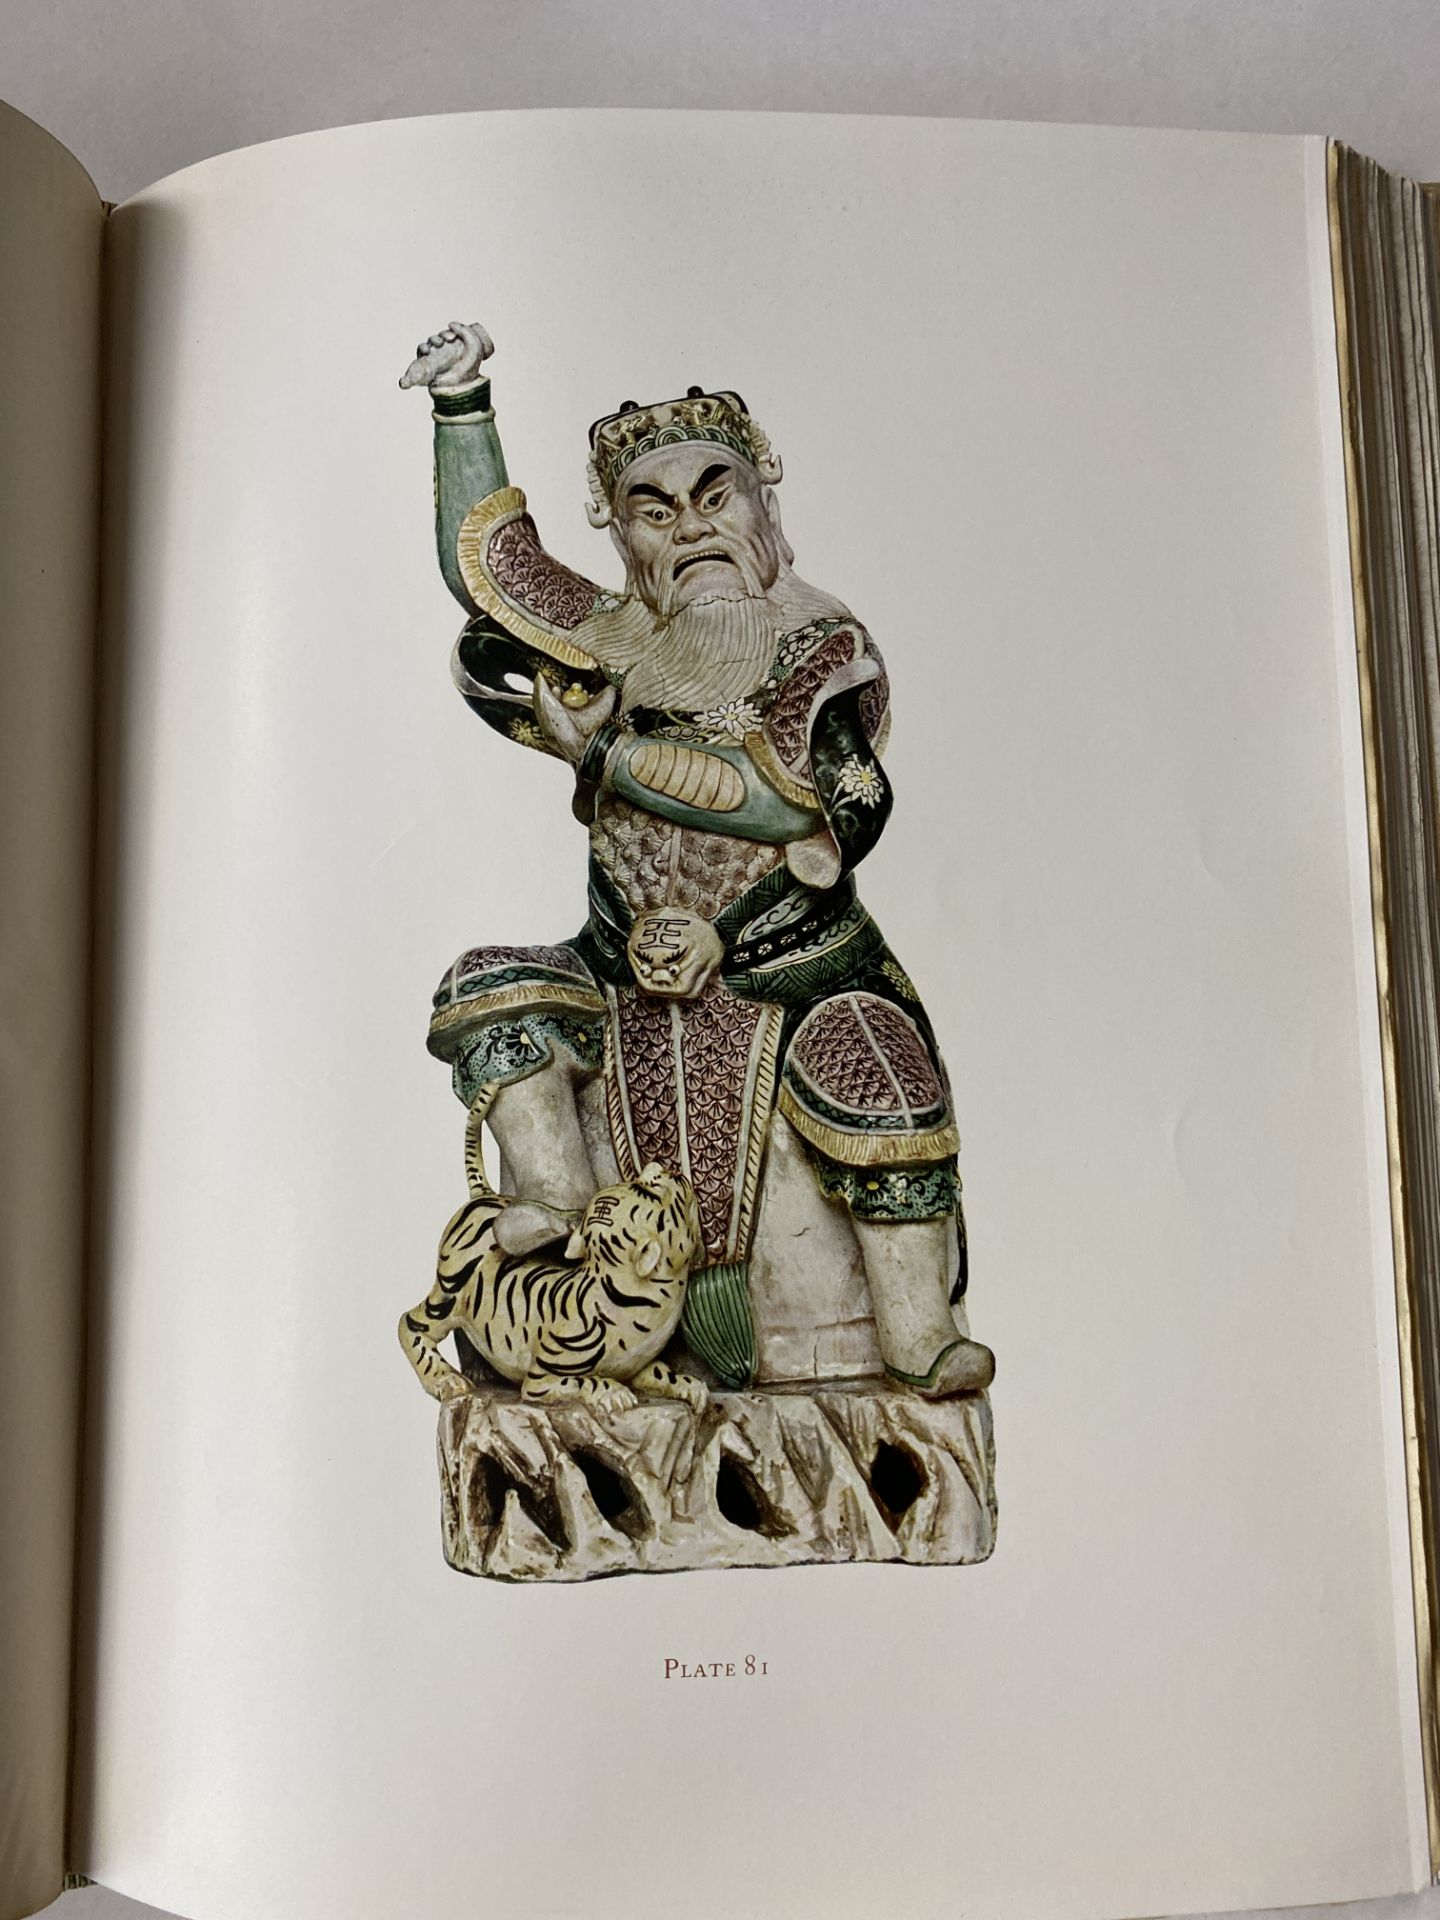 Art Reference Books on Asian Art - Chinese - Image 7 of 10